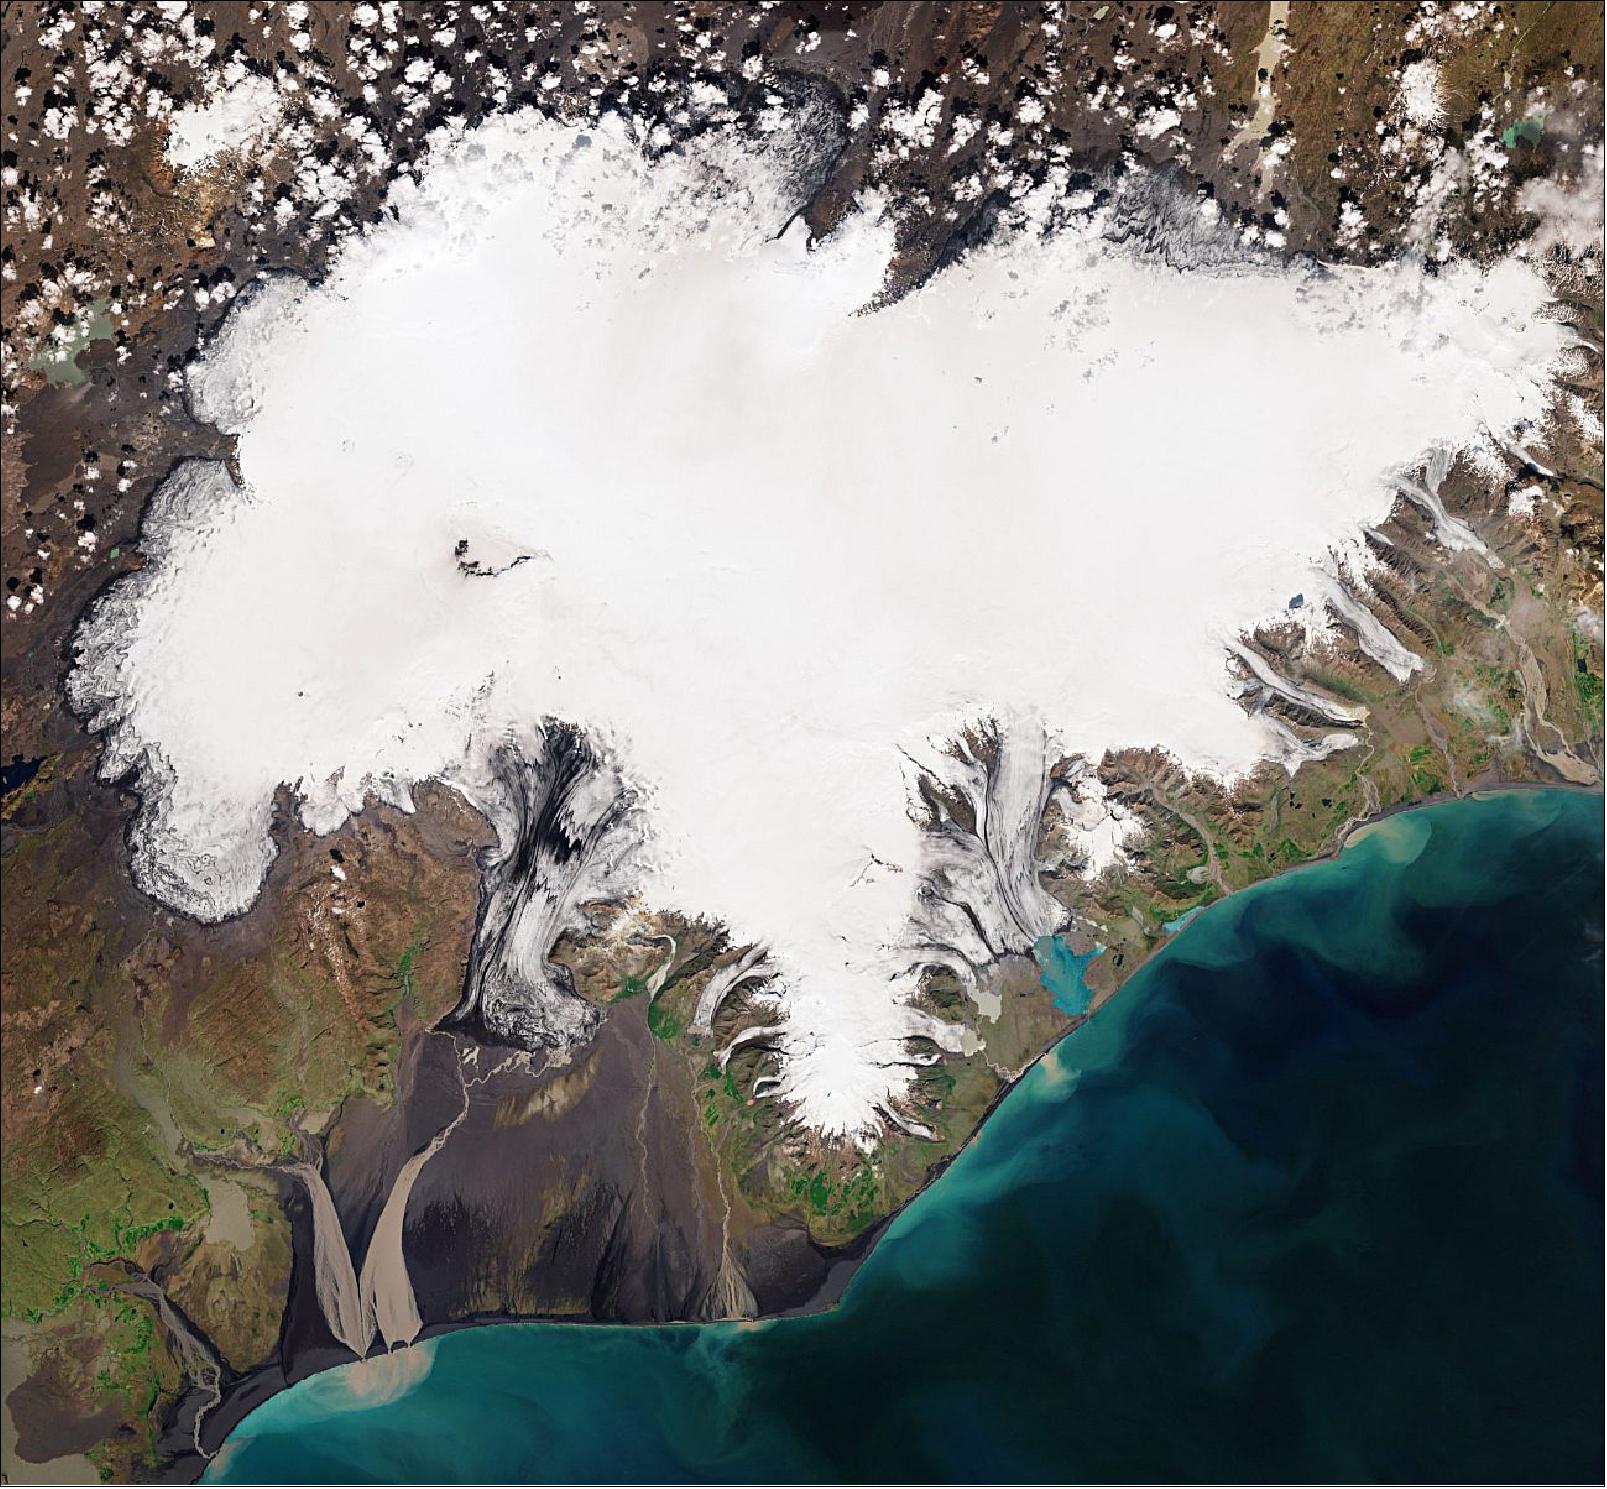 Figure 14: Covering an area of around 8400 km2, which is three times the size of Luxembourg, Vatnajökull is not only classified as the biggest glacier in Iceland, but the biggest in Europe. With an average ice thickness of around 900 m, the ice cap has about 30 outlet glaciers – many of which are retreating owing to warming temperatures. This image is also featured on the Earth from Space video program (image credit: ESA, the image contains modified Copernicus Sentinel data (2019), processed by ESA)